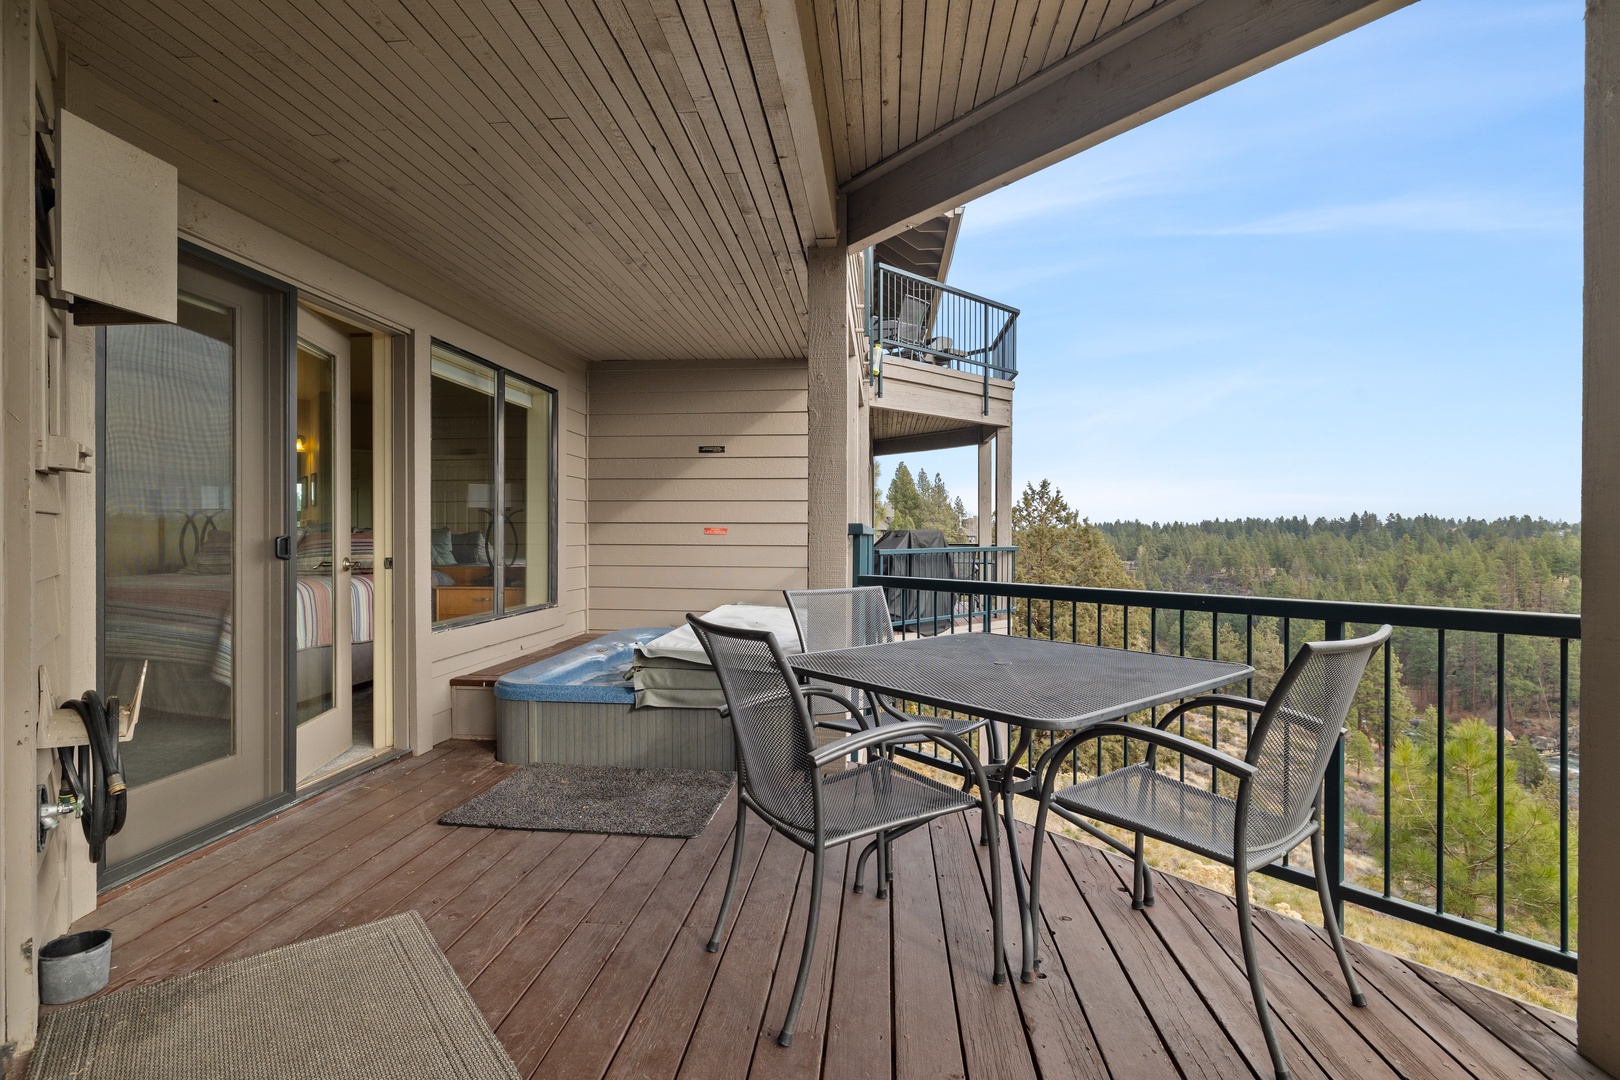 Spacious balcony with outdoor seating, grill, and hot tub